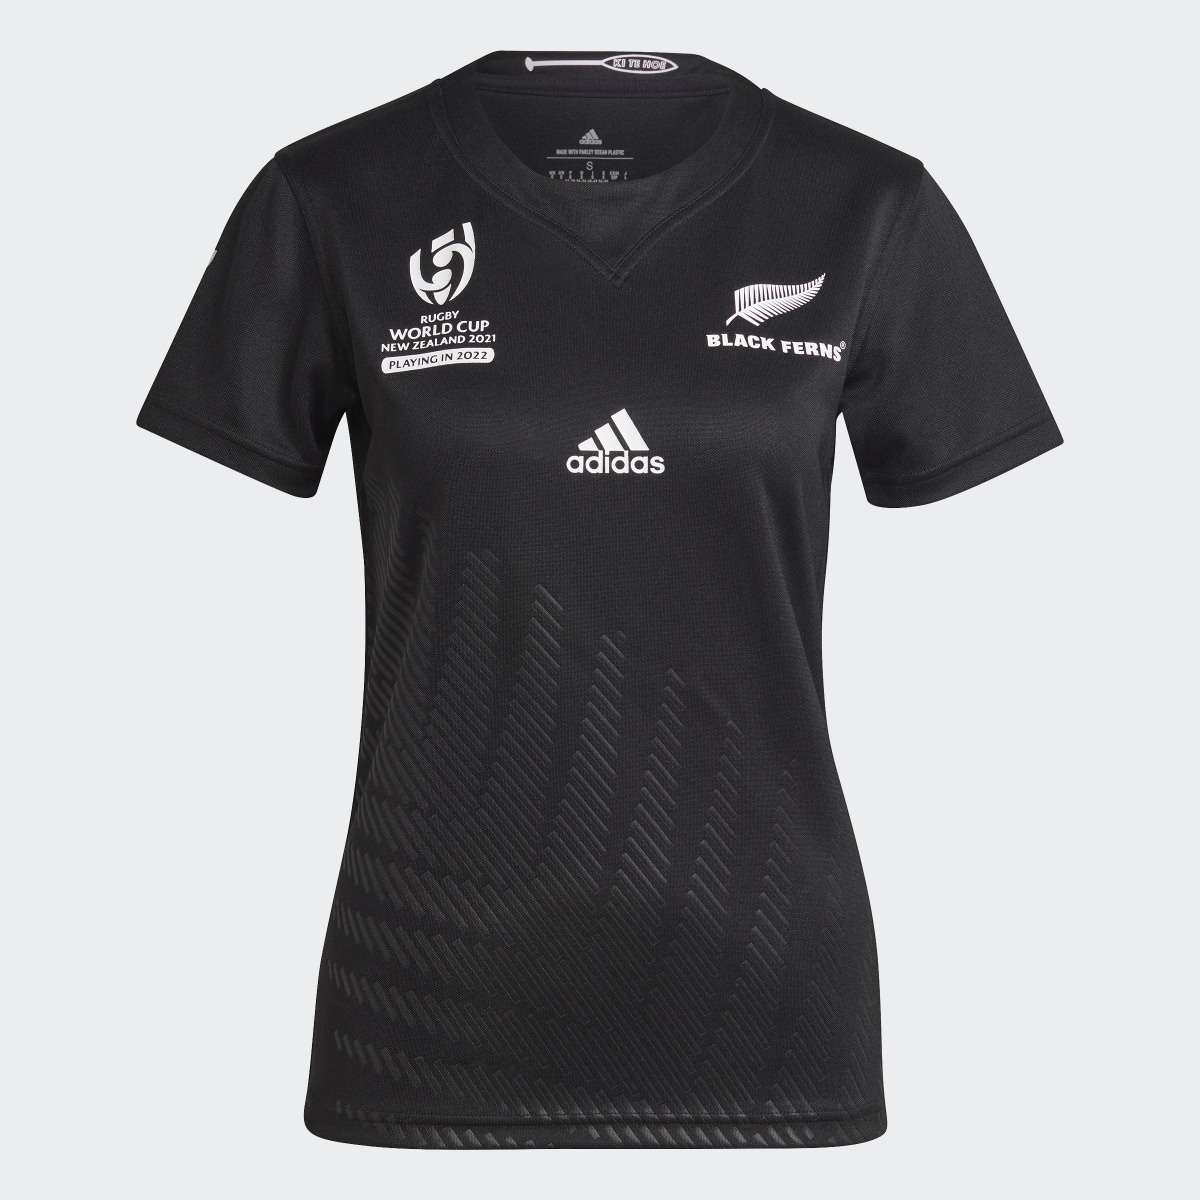 Adidas Black Ferns Rugby World Cup Home Jersey. 9